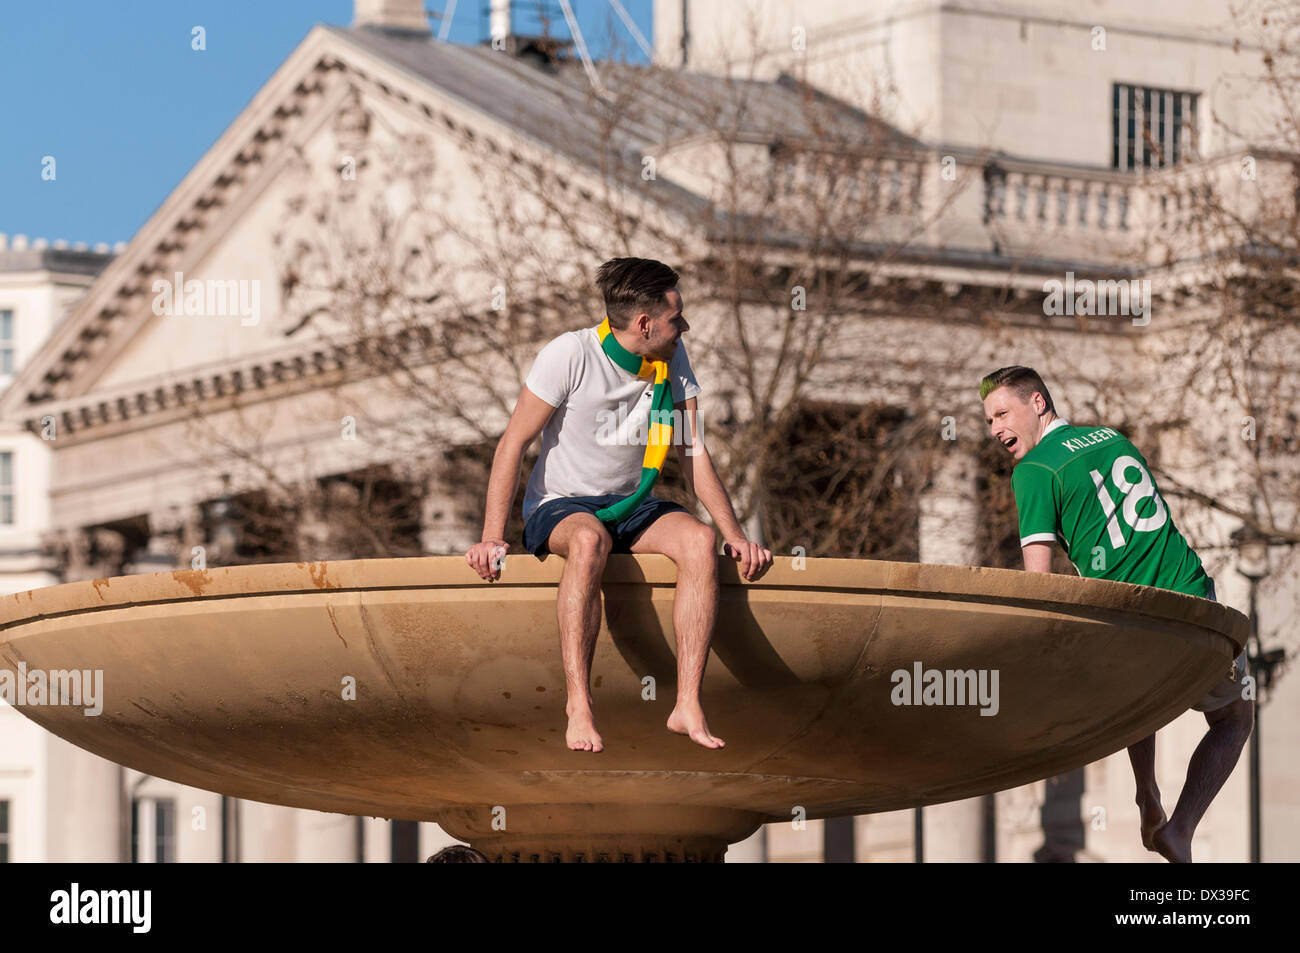 Trafalgar Square, London, UK, 16 March 2014 - thousands of people gather in the square to celebrate St. Patrick's Day.  Two young men climb, illegally, one of the fountains in the square.  Credit:  Stephen Chung/Alamy Live News Stock Photo